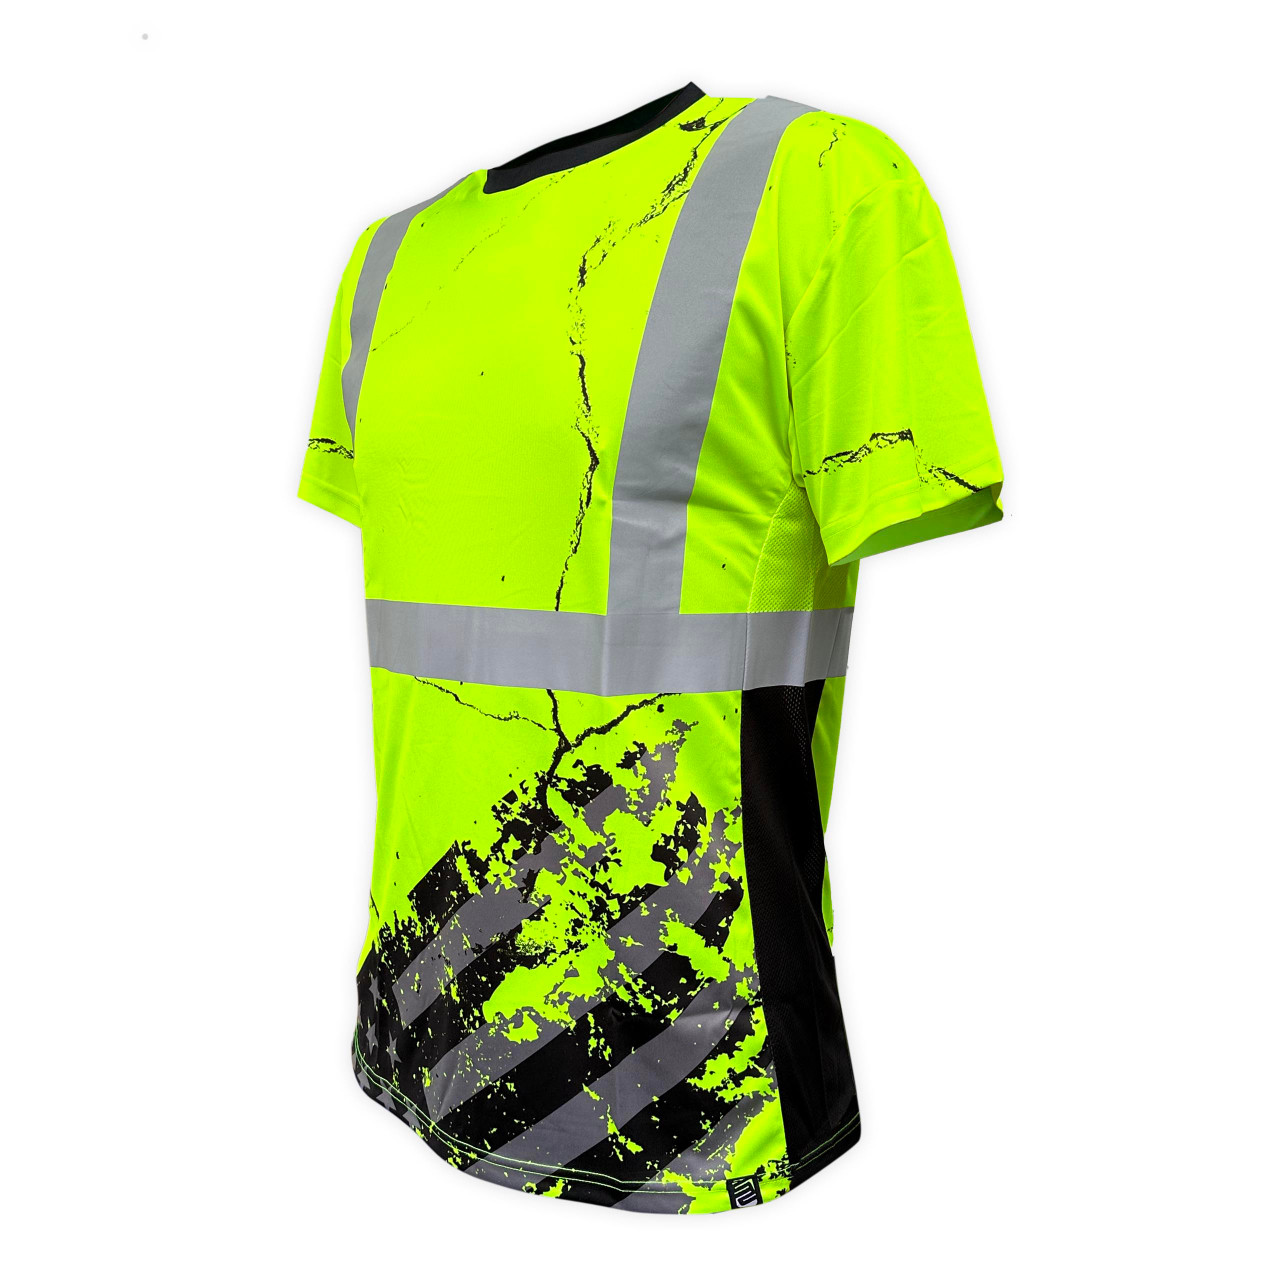 American Grit Yellow Class 2 Type-R Reflective Safety Shirt